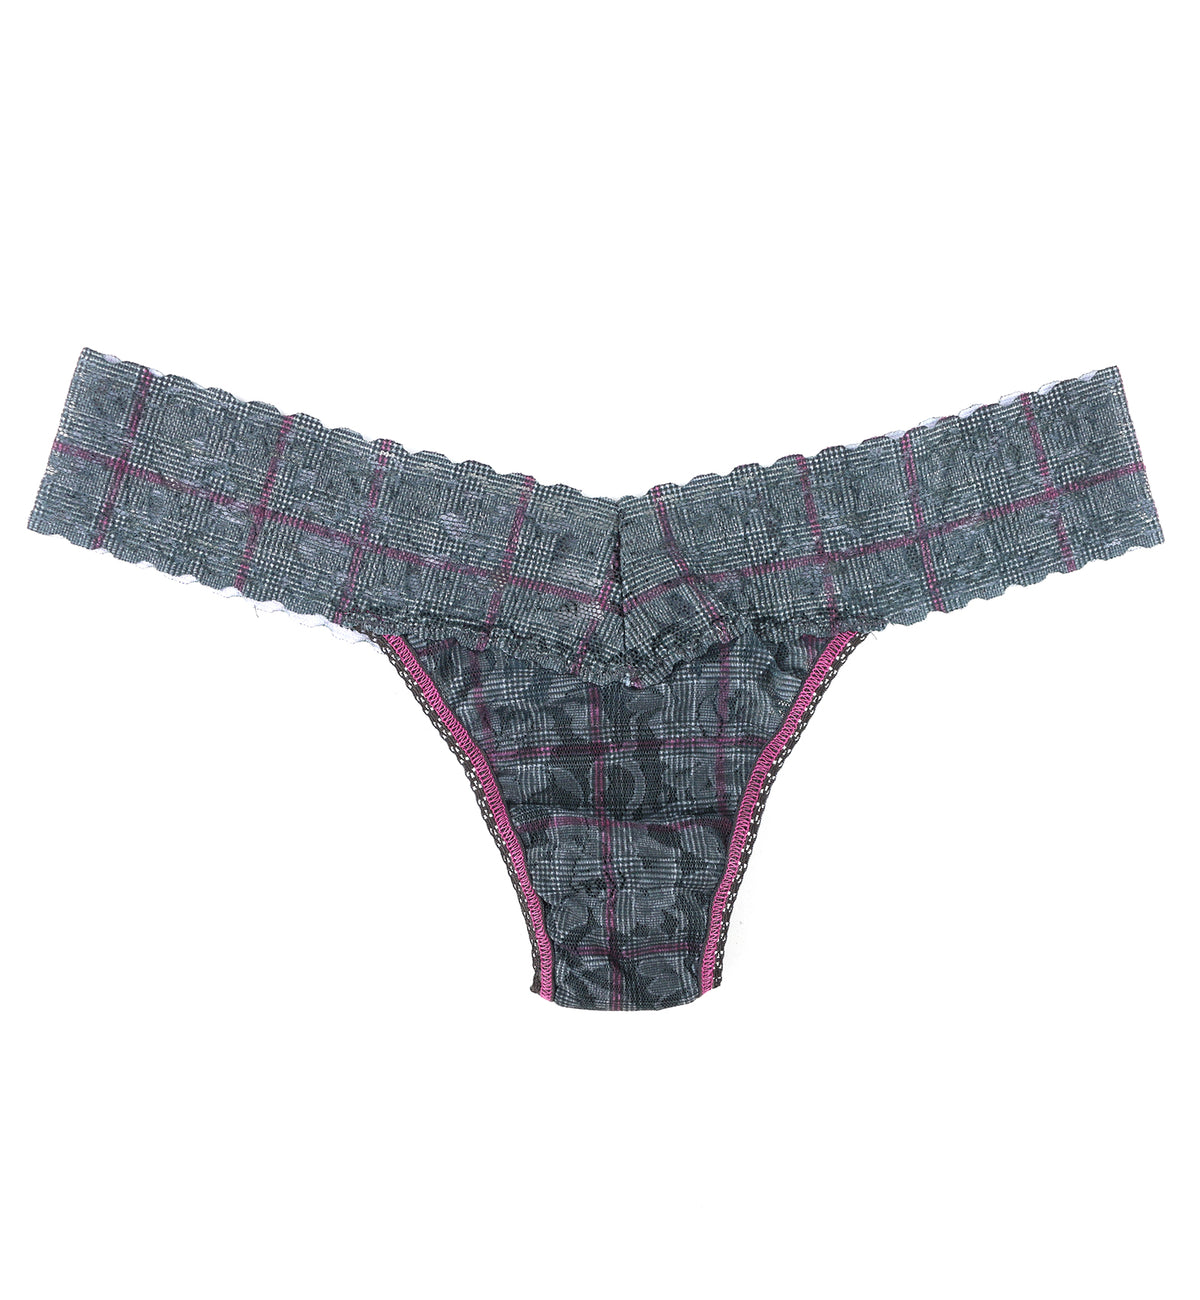 Hanky Panky Signature Lace Printed Low Rise Thong (PR4911P),Academy Check - Academy Check,One Size